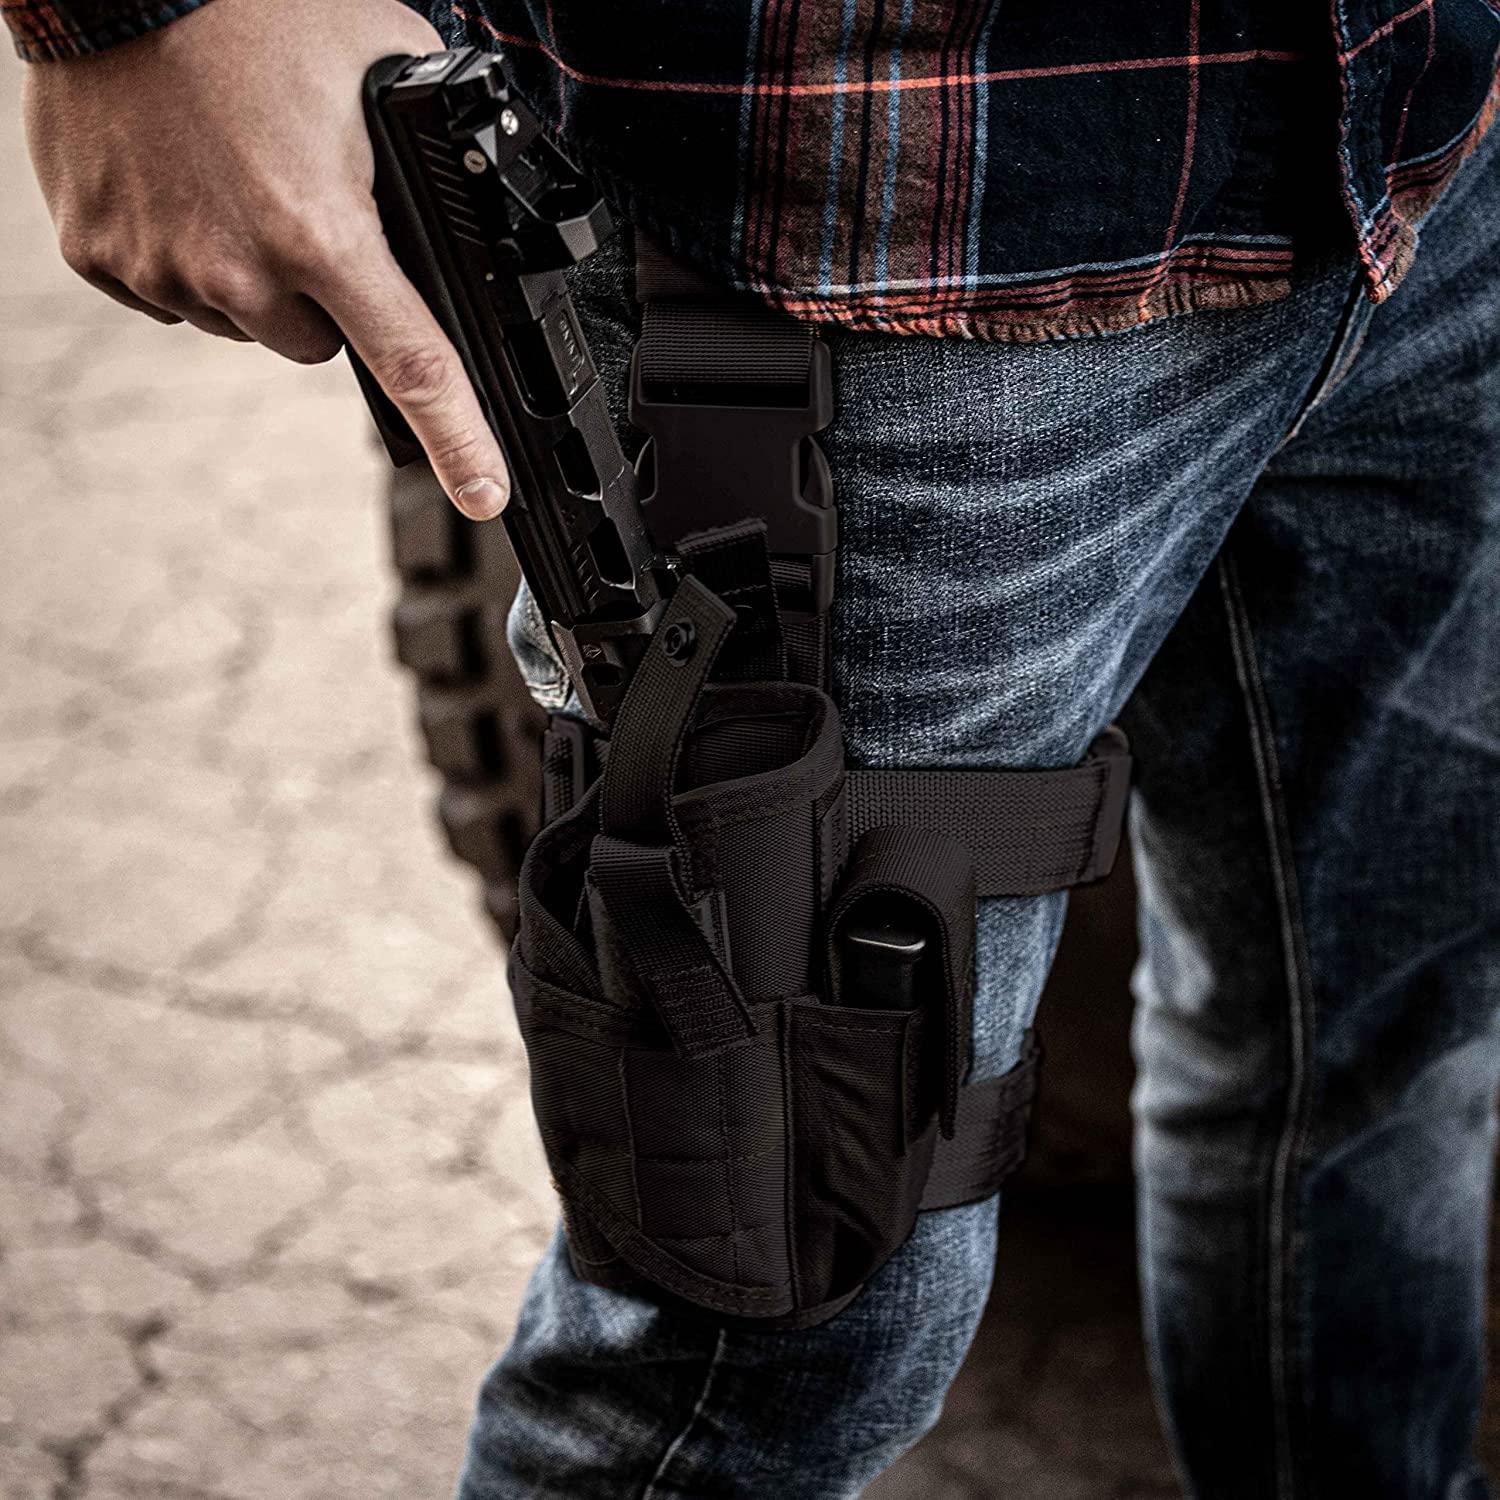 Tacticon Universal Drop Leg Holster, Combat Veteran Owned Company, Tactical Thigh Holster with Mag Pouch